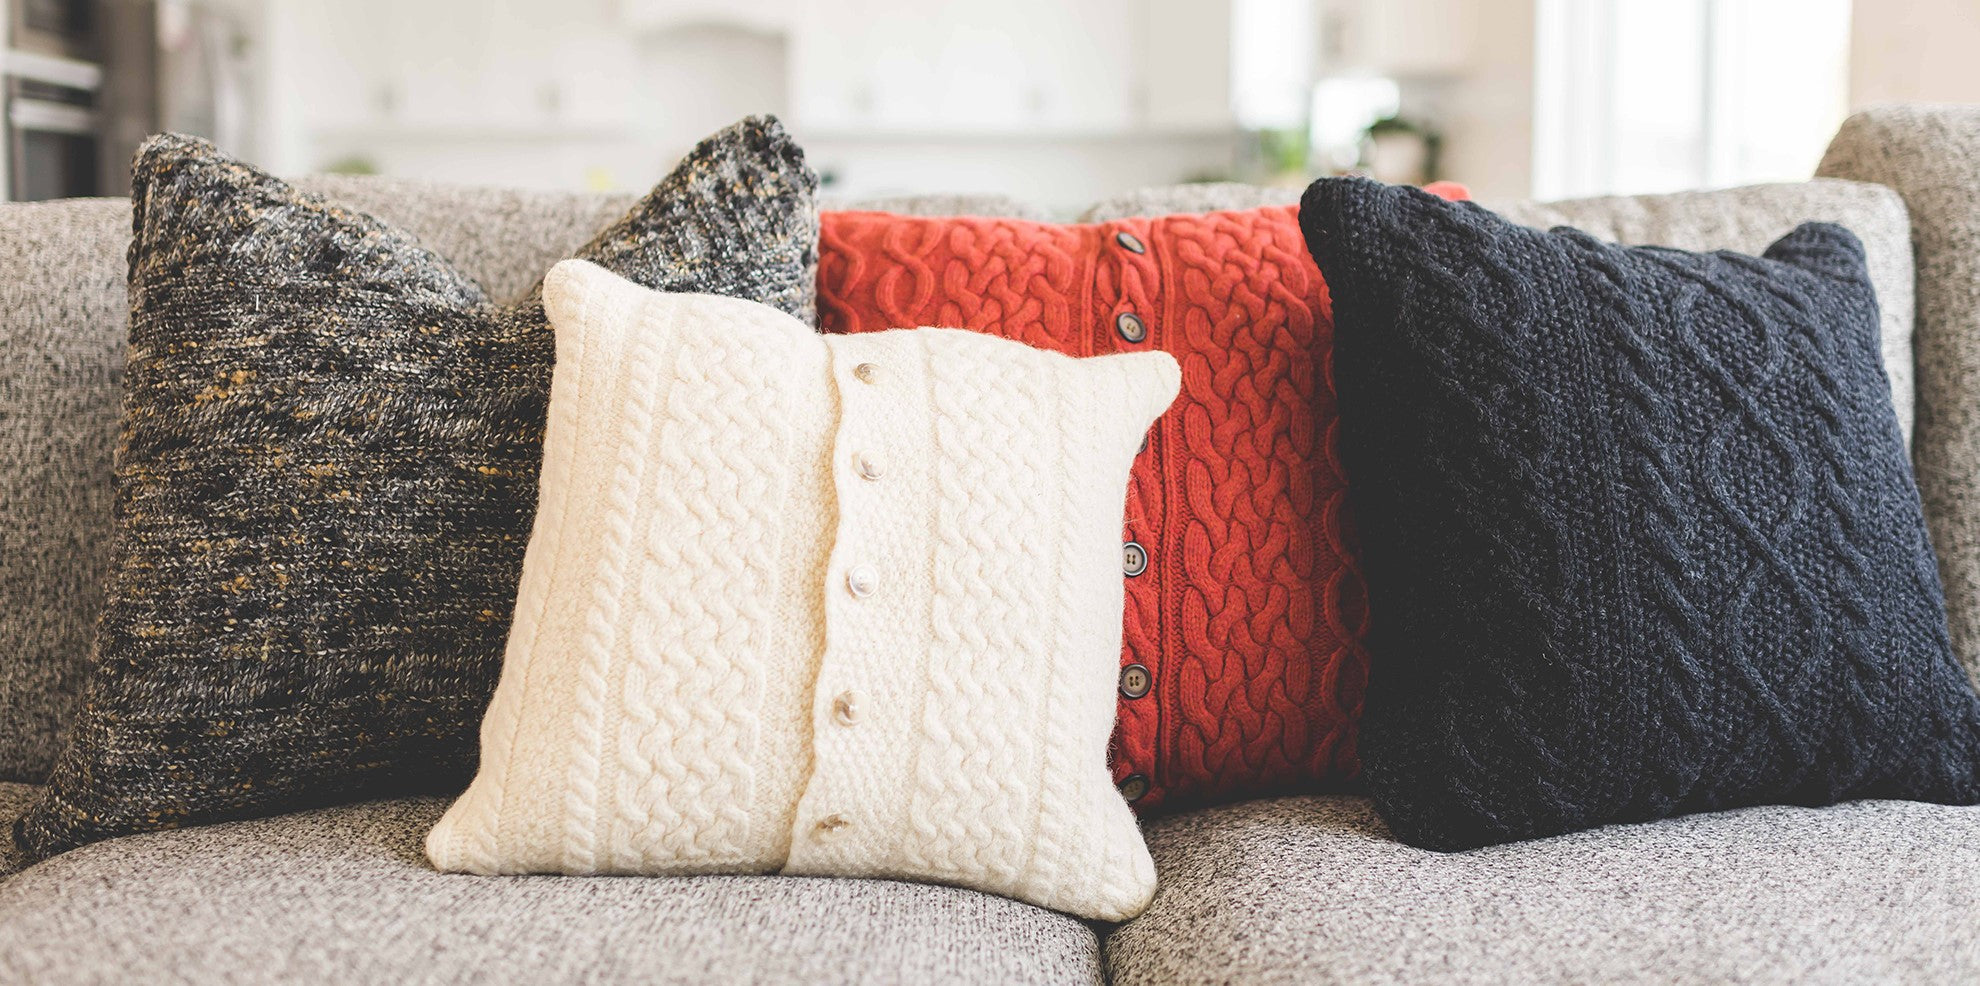 Sweater Pillow covers